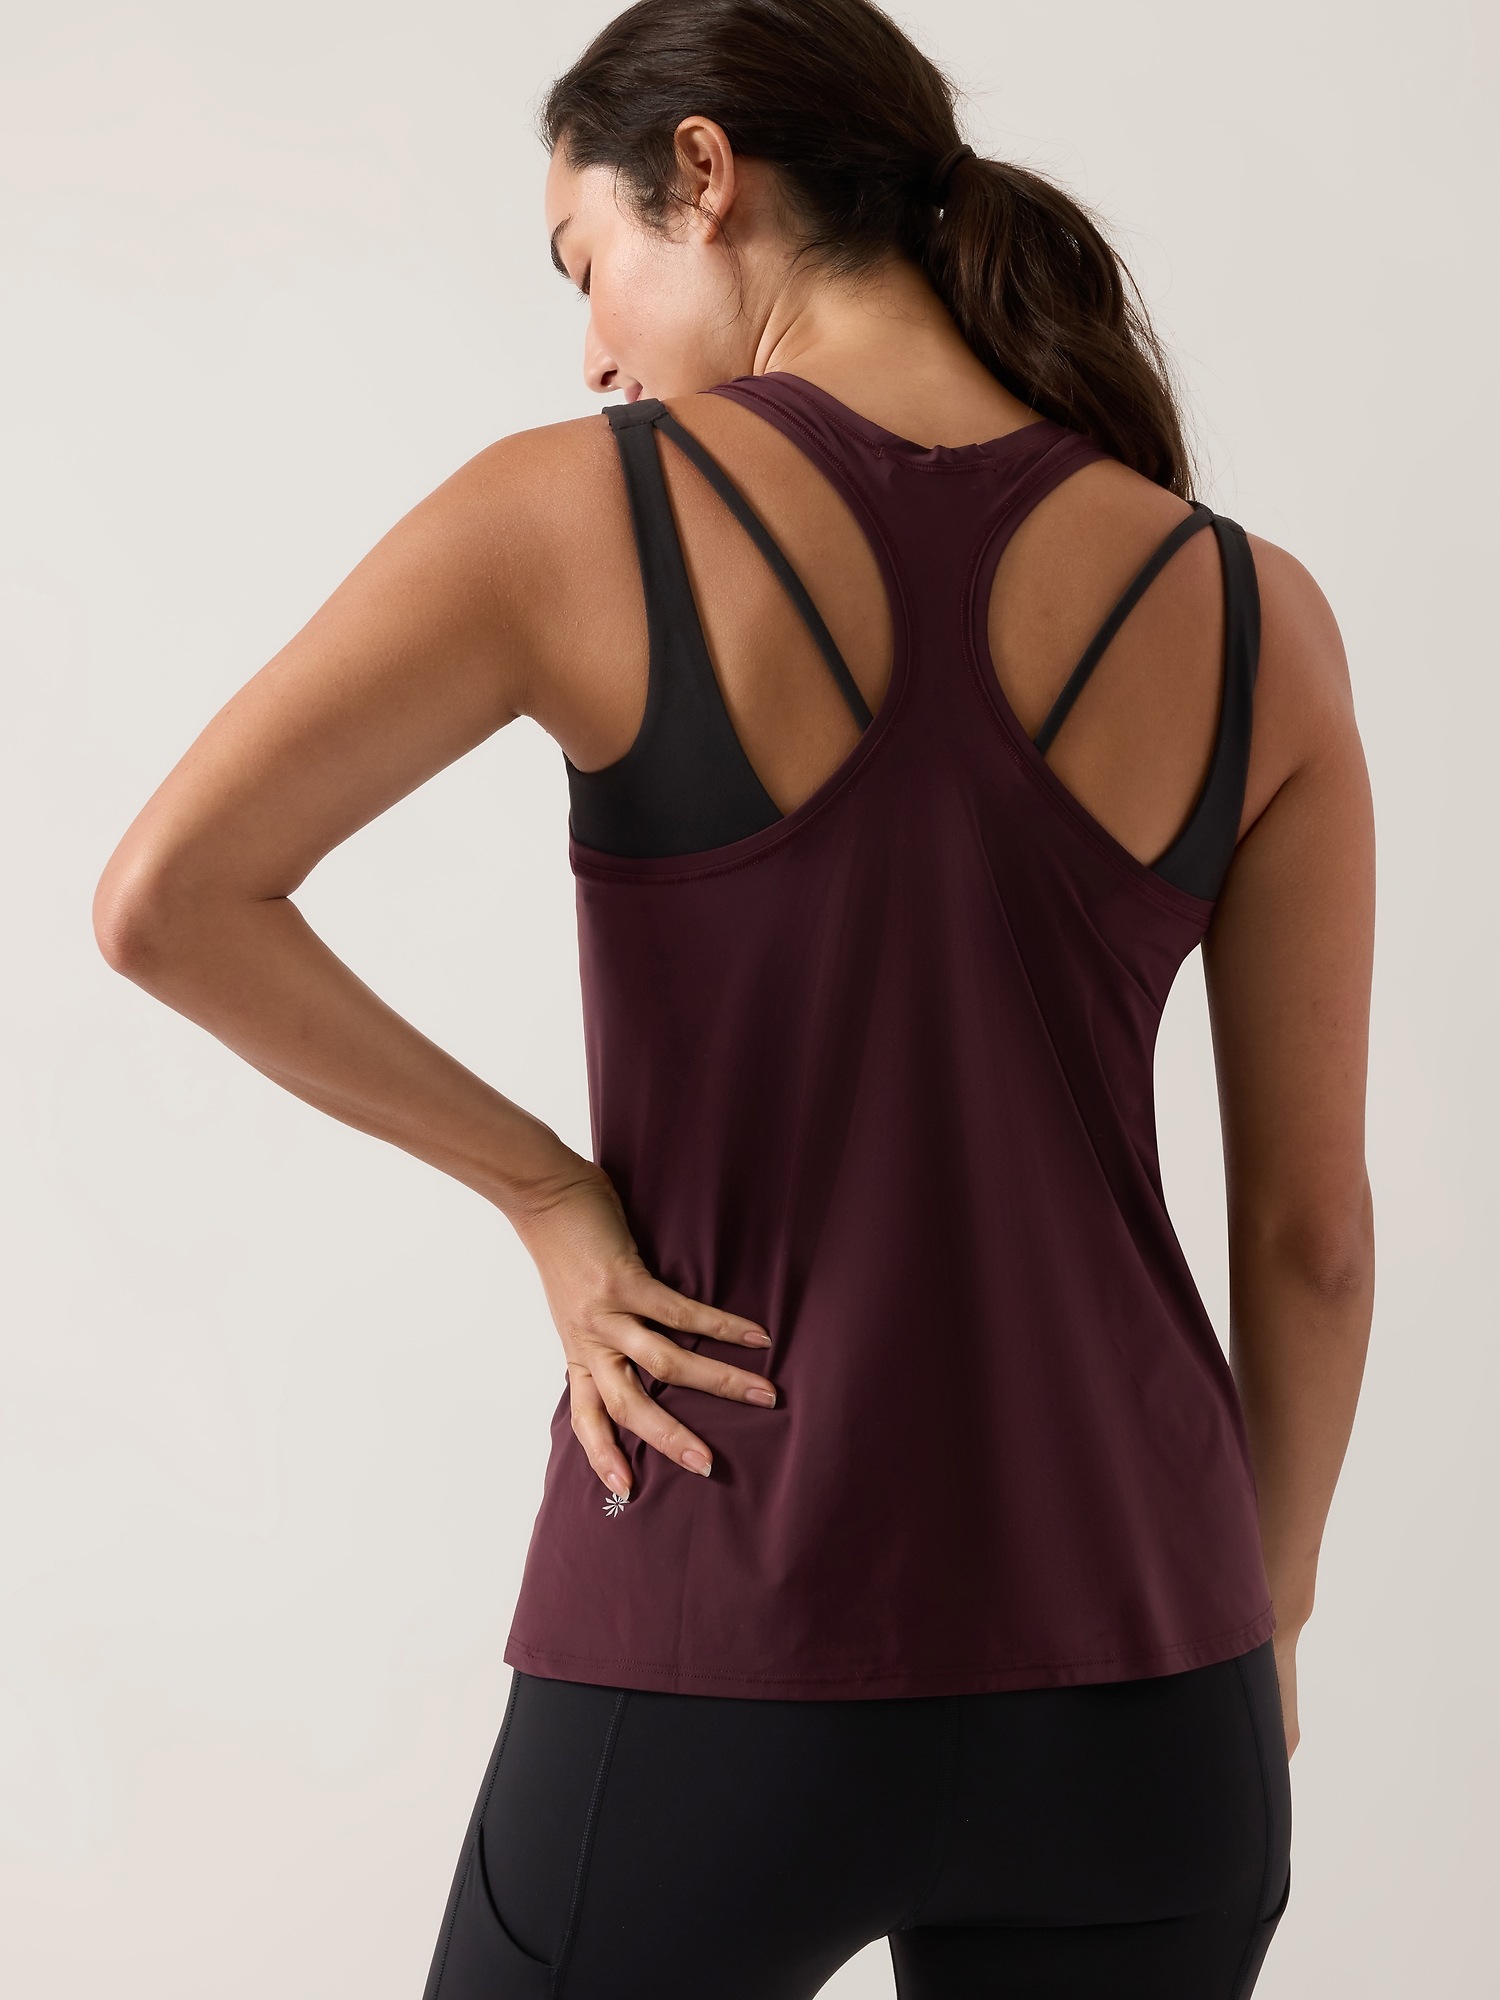 Buy DREAM SLIM Sexy Workout Tops for Women Tie Back Open Back